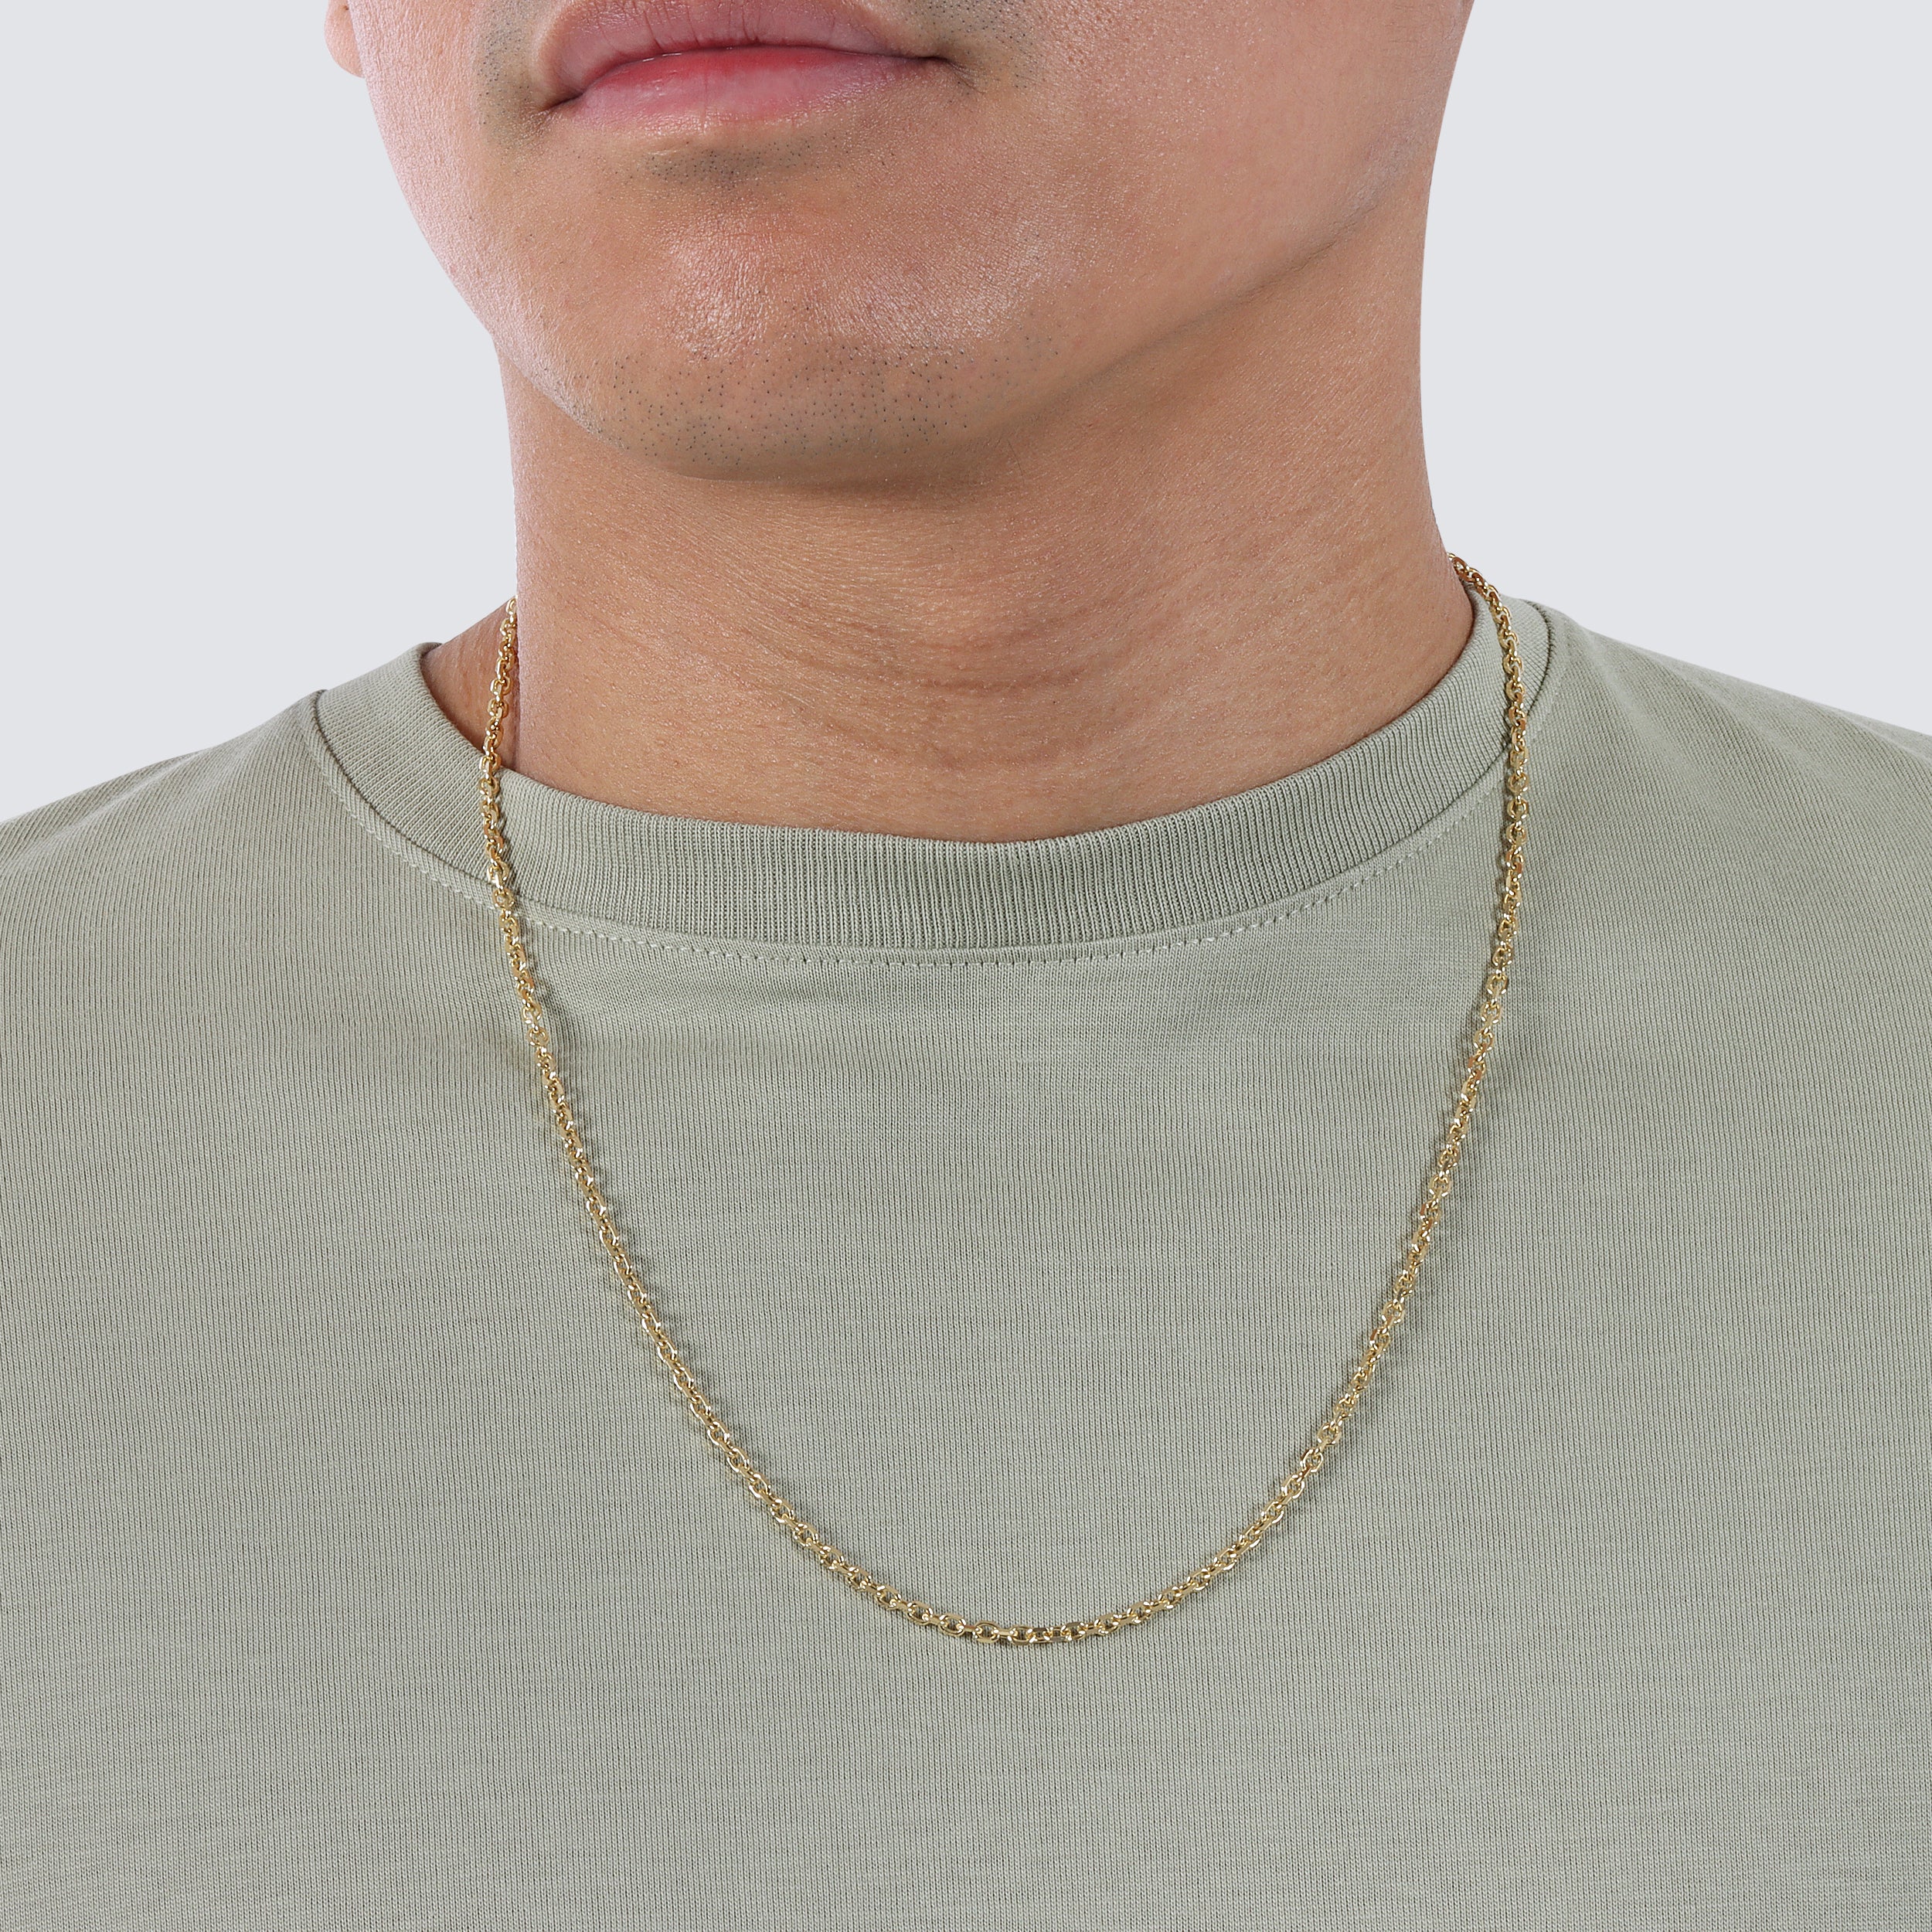 14K Yellow Gold 10mm Handcrafted Rolo Chain Necklace 40 Inches | Sarraf.com